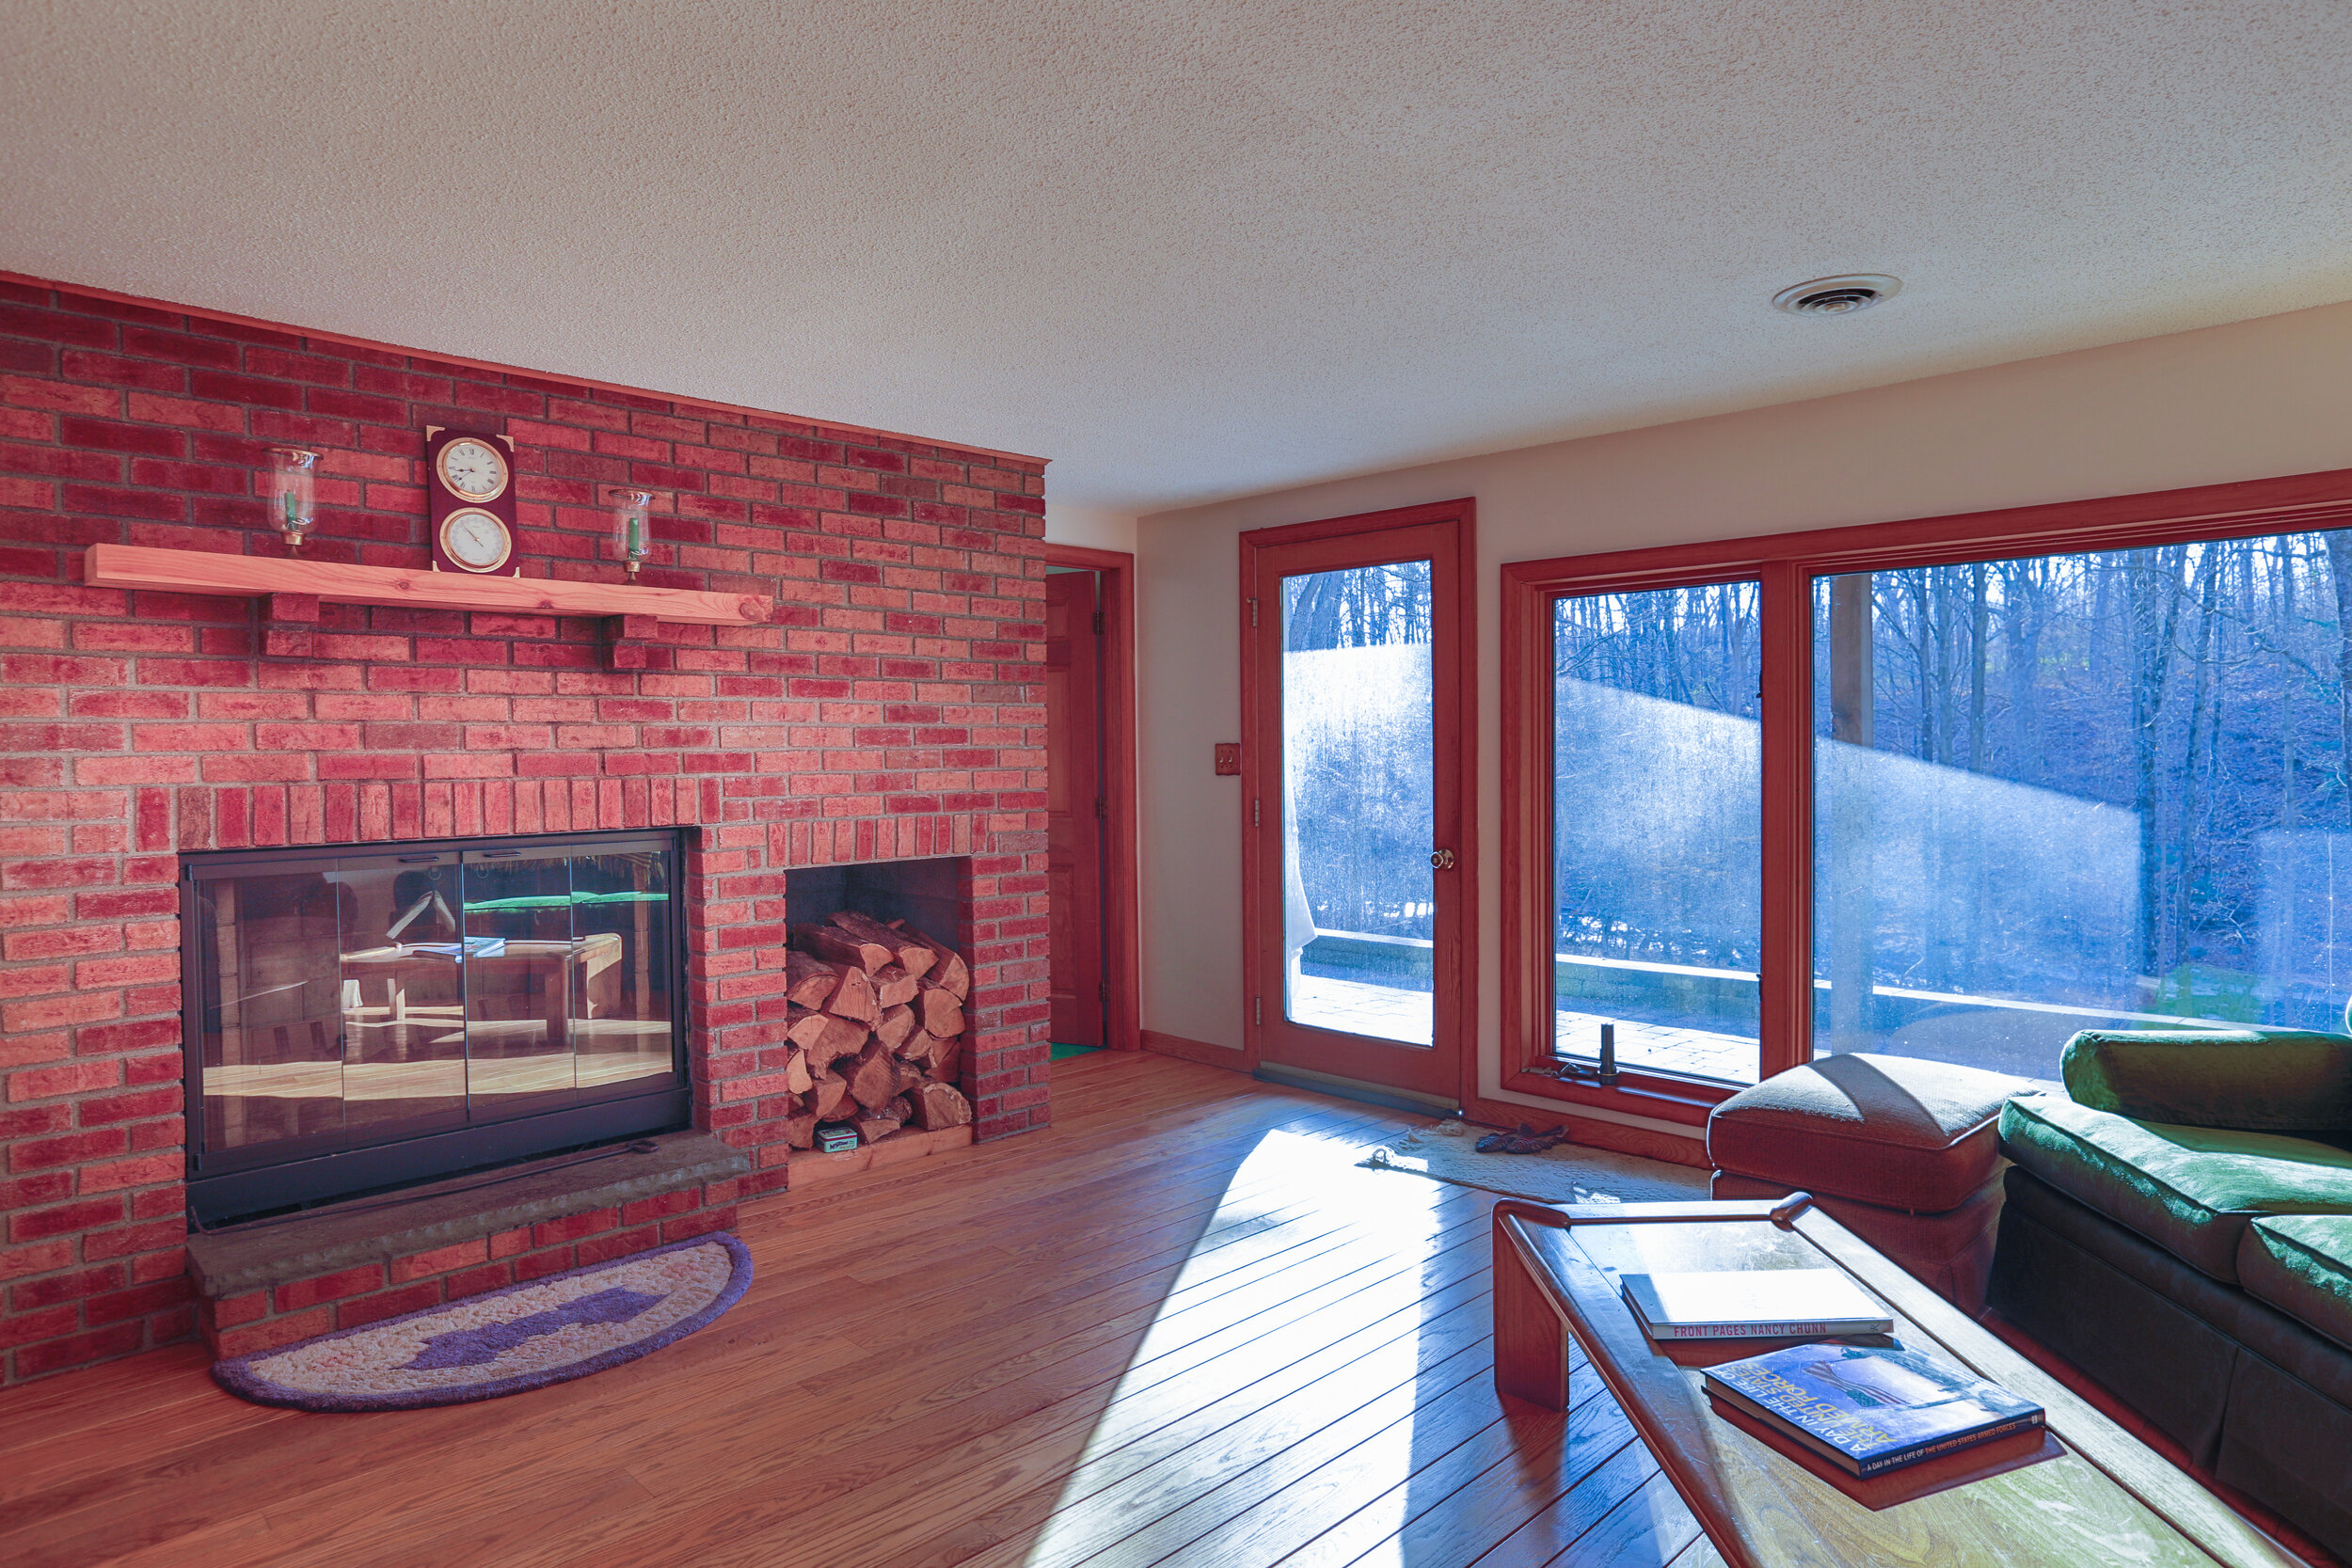  Living room with brick fire place.  Fire is not lit in the fireplace.  Floating wood shelf is hanging above the fireplace with decorations on them.  To the right of the photo is a row of floor to ceiling windows looking outside. 